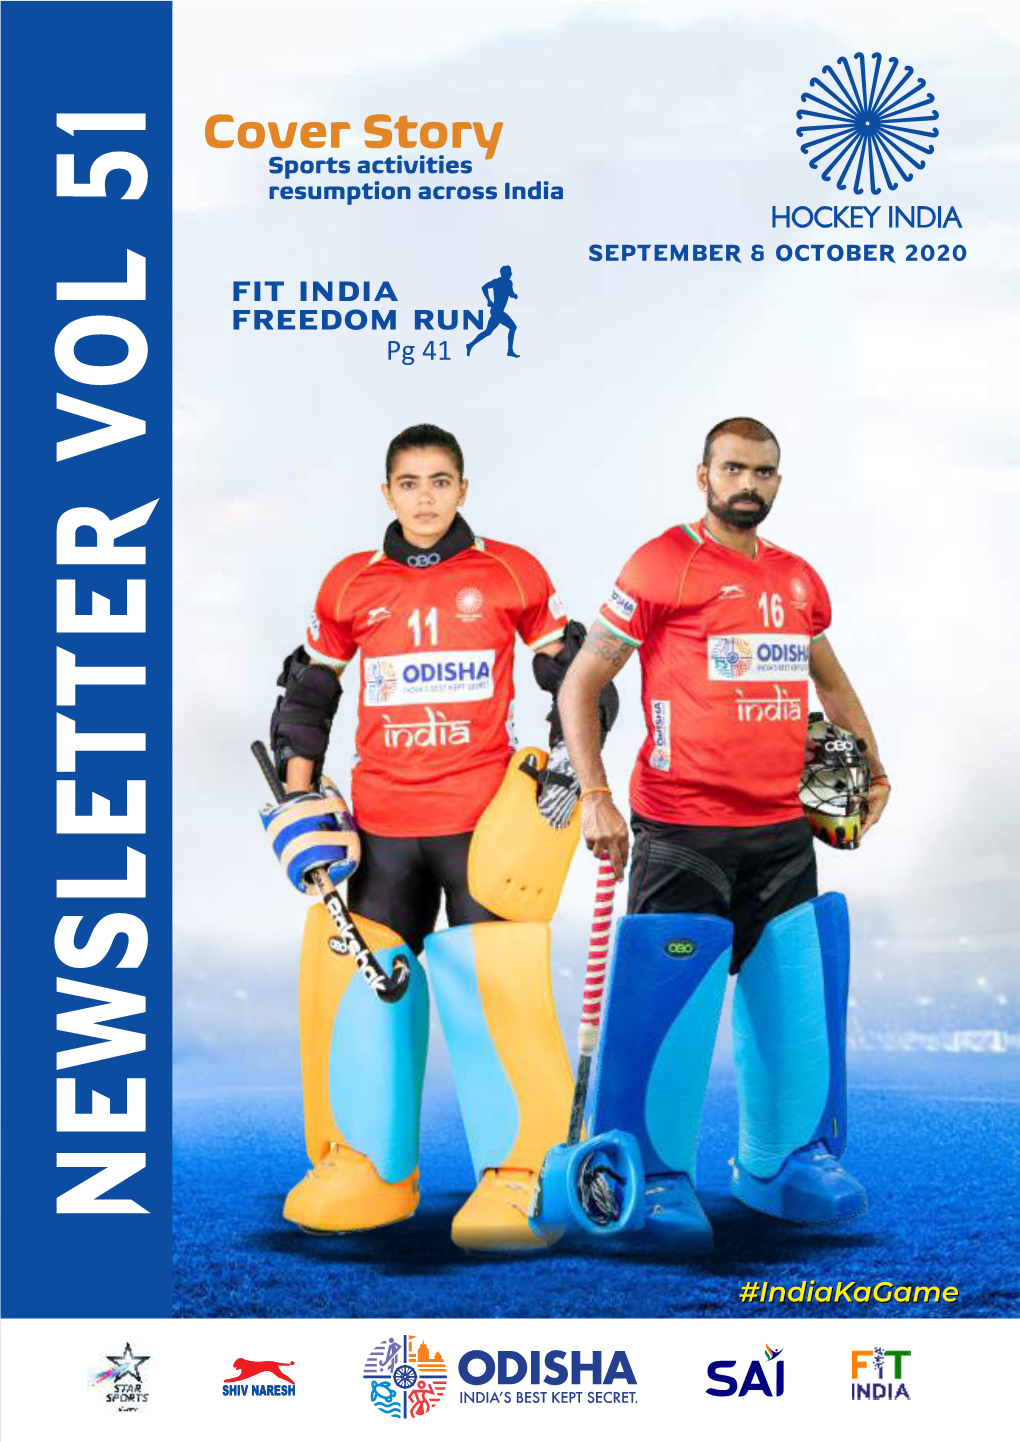 Coaching Course (Online) for Hockey India State Member Units Which Saw Par�Cipa�On of Over 130 Candidates Held from 23 September 2020 to 10 October 2020